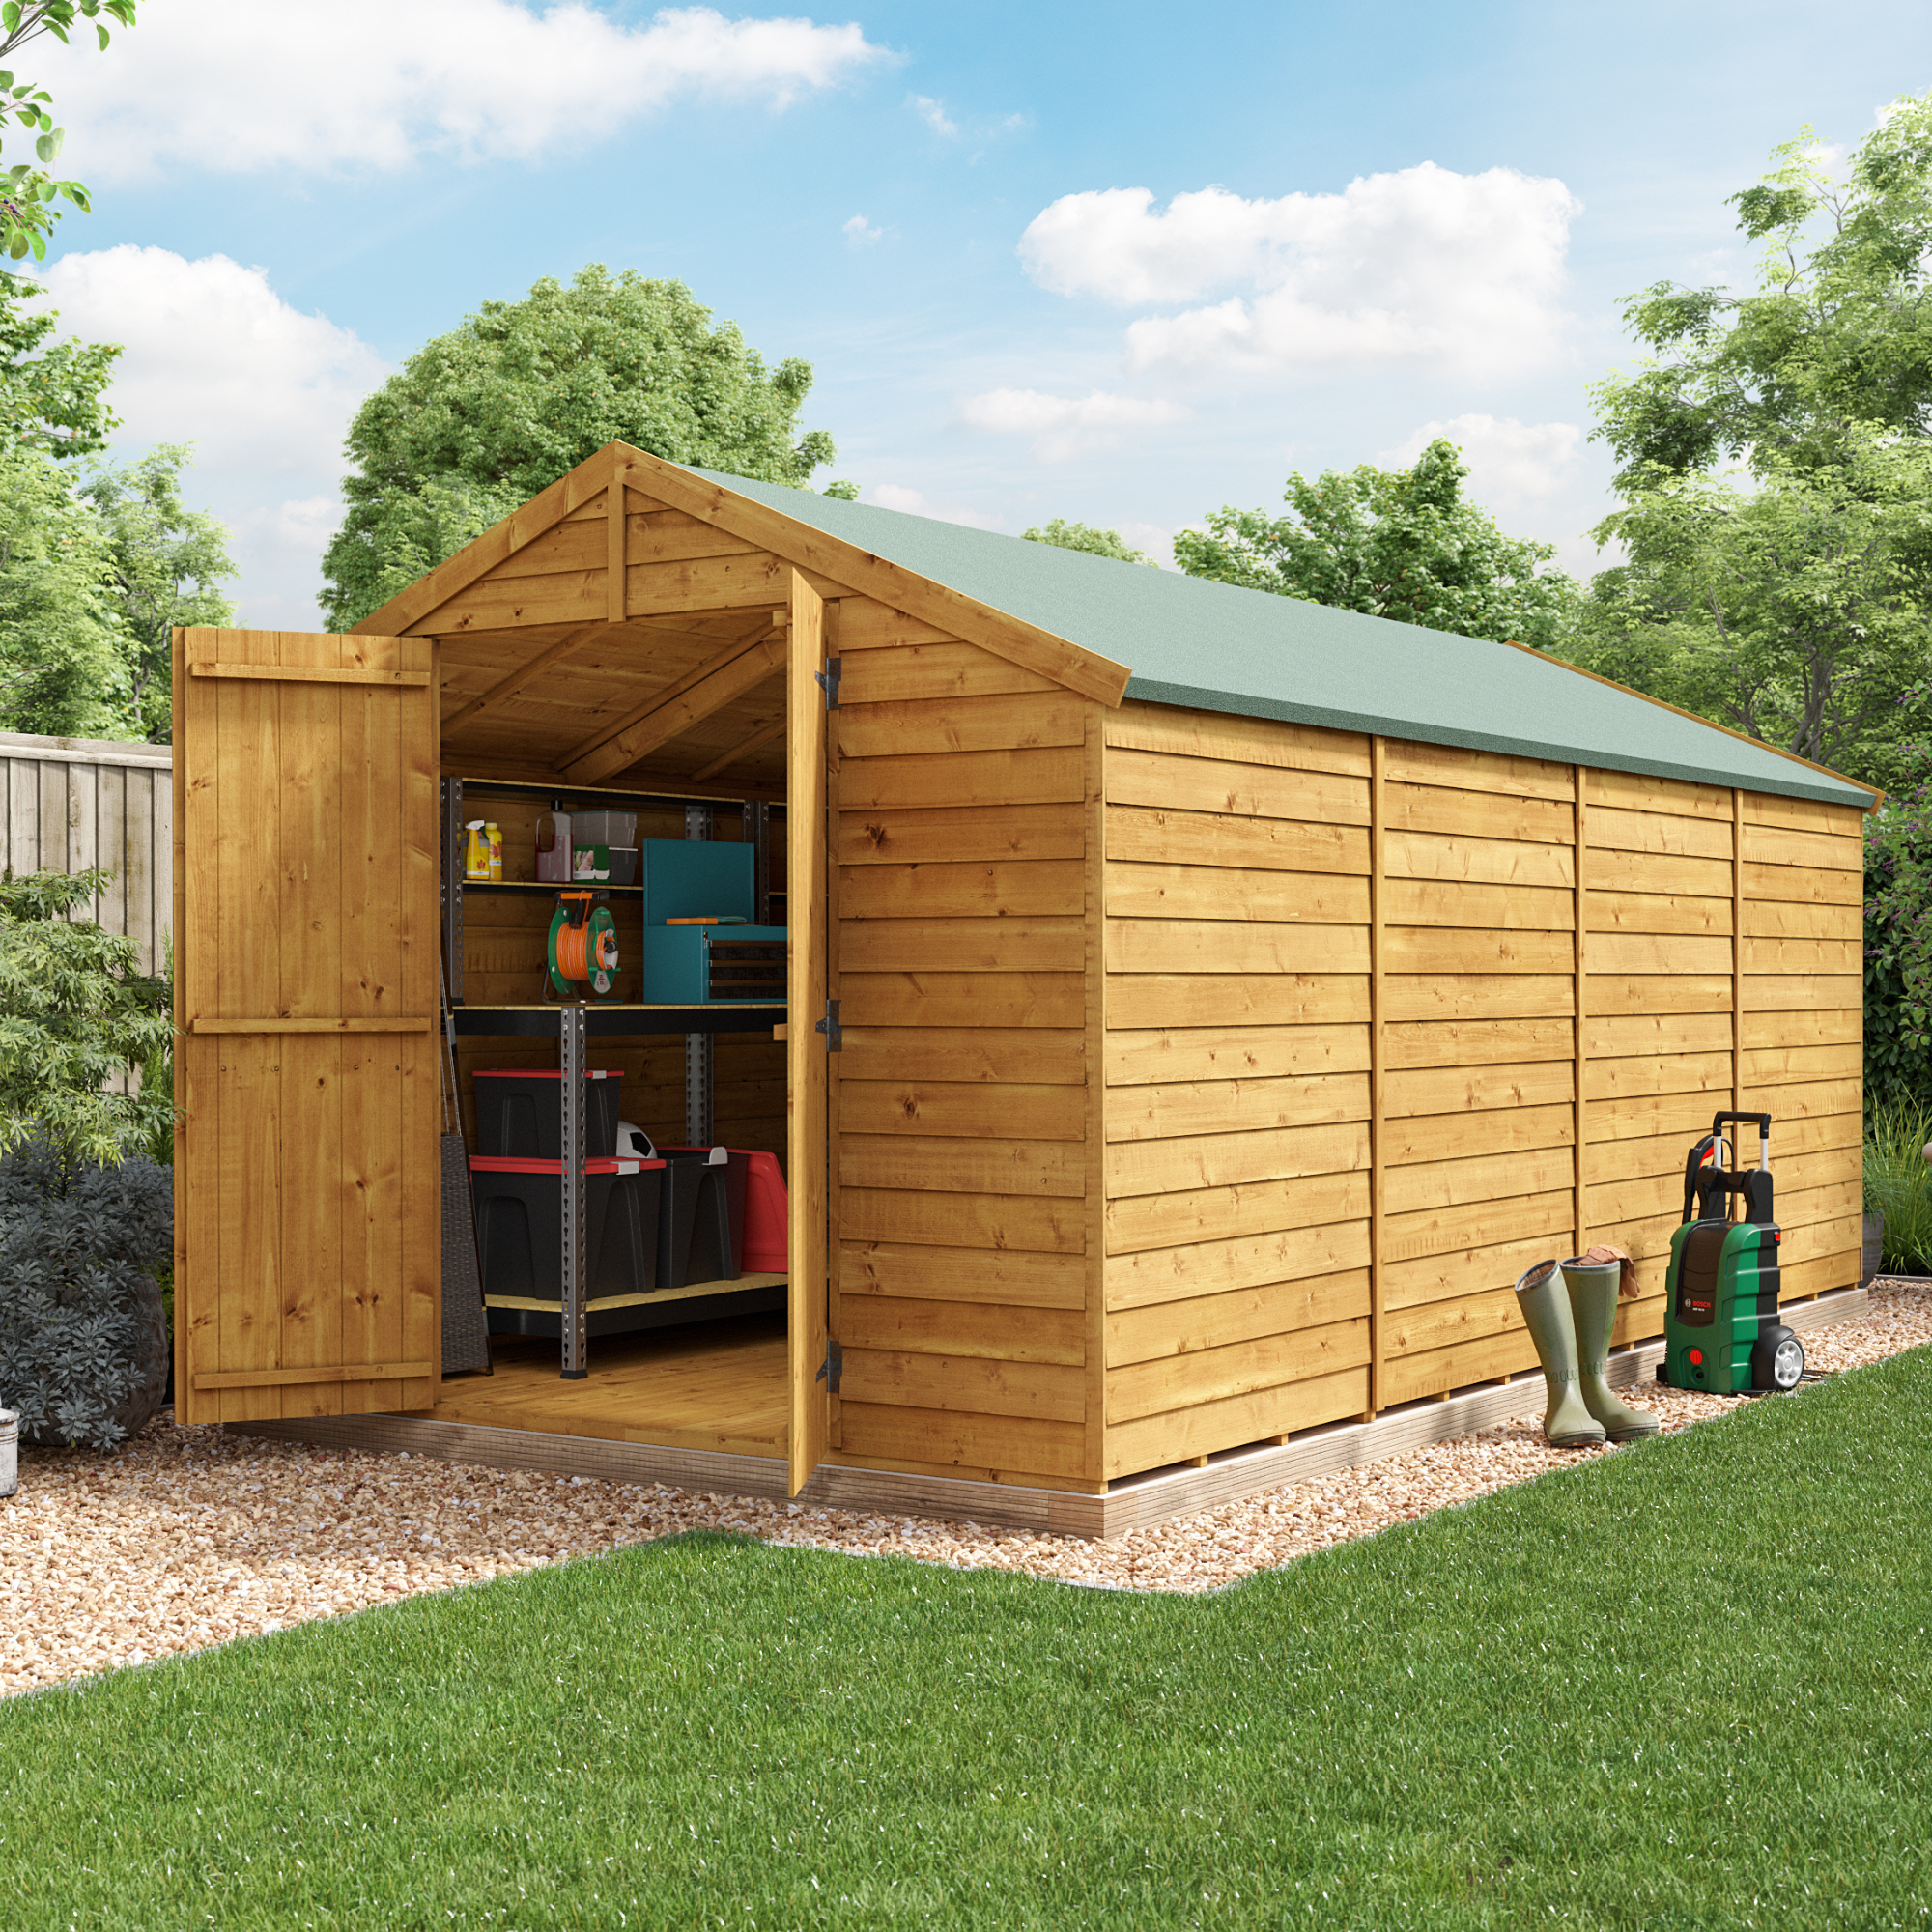 16 x 8 Shed - BillyOh Keeper Overlap Apex Wooden Shed - Windowless 16x8 Garden Shed